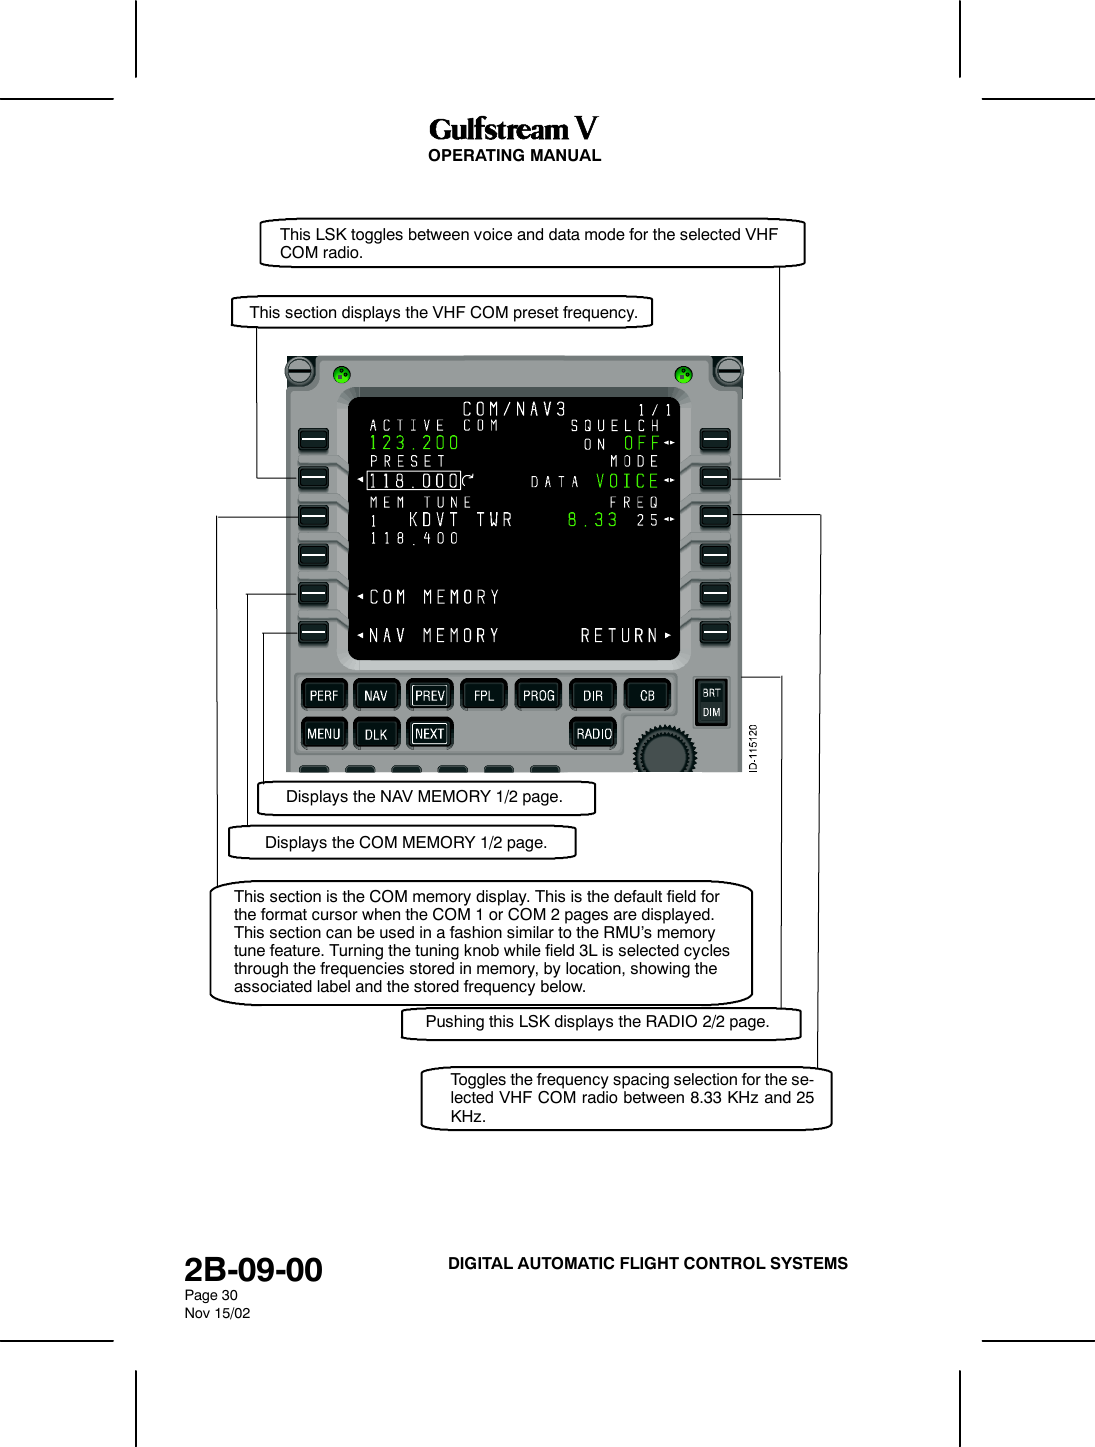 OPERATING MANUAL2B-09-00Page 30Nov 15/02DIGITAL AUTOMATIC FLIGHT CONTROL SYSTEMSThis section displays the VHF COM preset frequency.This section is the COM memory display. This is the default field forthe format cursor when the COM 1 or COM 2 pages are displayed.This section can be used in a fashion similar to the RMU’s memorytune feature. Turning the tuning knob while field 3L is selected cyclesthrough the frequencies stored in memory, by location, showing theassociated label and the stored frequency below.Toggles the frequency spacing selection for the se-lected VHF COM radio between 8.33 KHz and 25KHz.Pushing this LSK displays the RADIO 2/2 page.This LSK toggles between voice and data mode for the selected VHFCOM radio.Displays the NAV MEMORY 1/2 page.Displays the COM MEMORY 1/2 page.